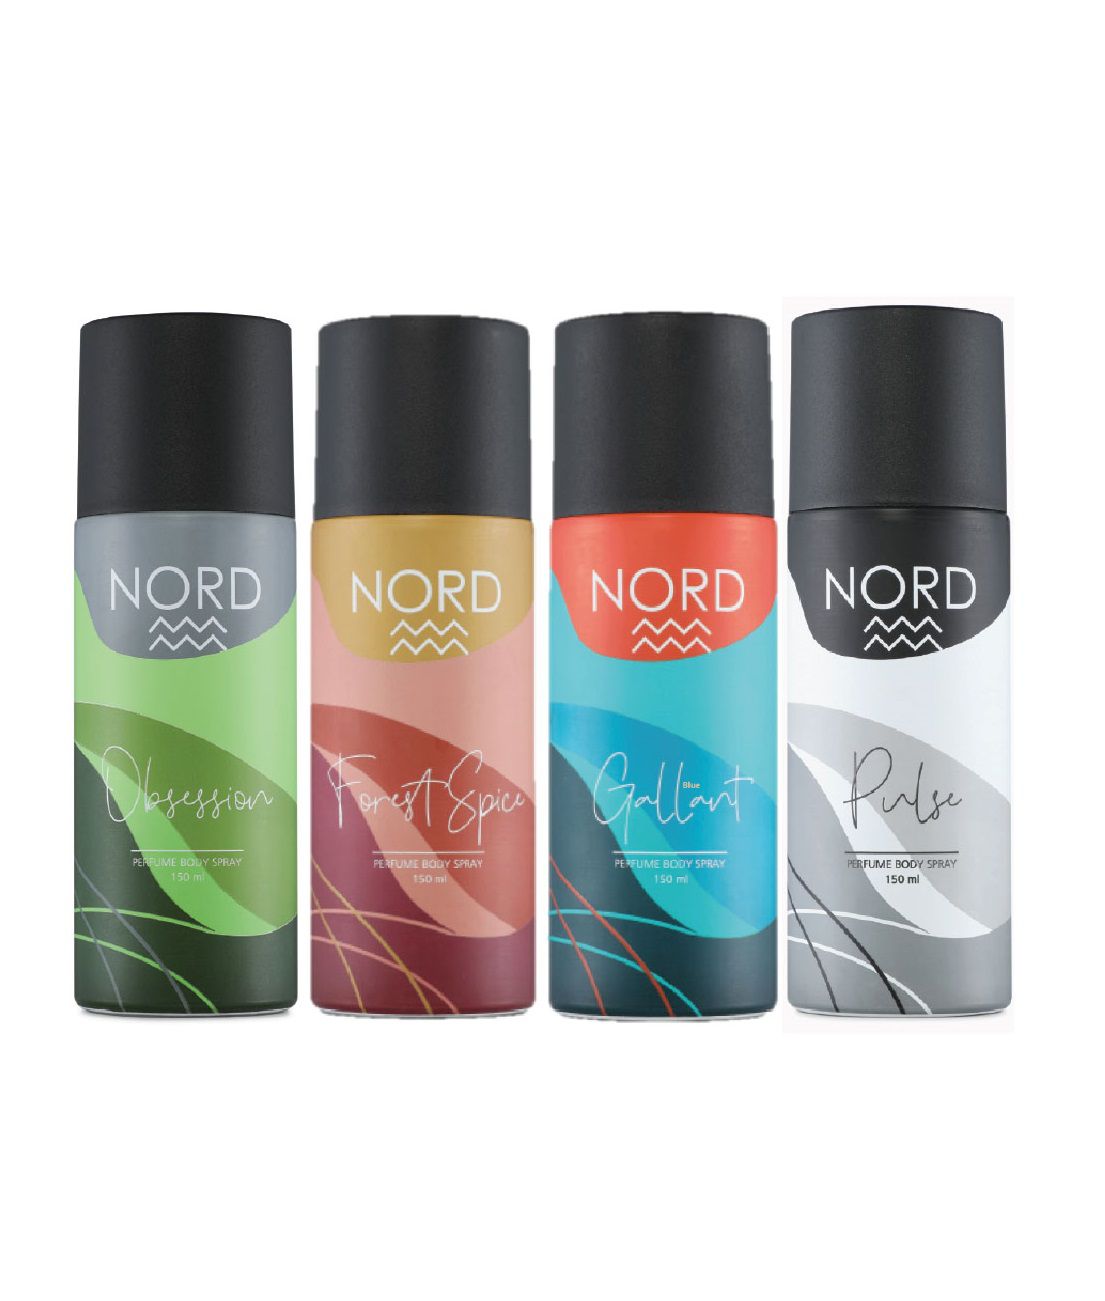     			NORD Deodorant Body Spray - Obsession, Forest Spice, Gallant and Pulse 150 ml each (Pack of 4)